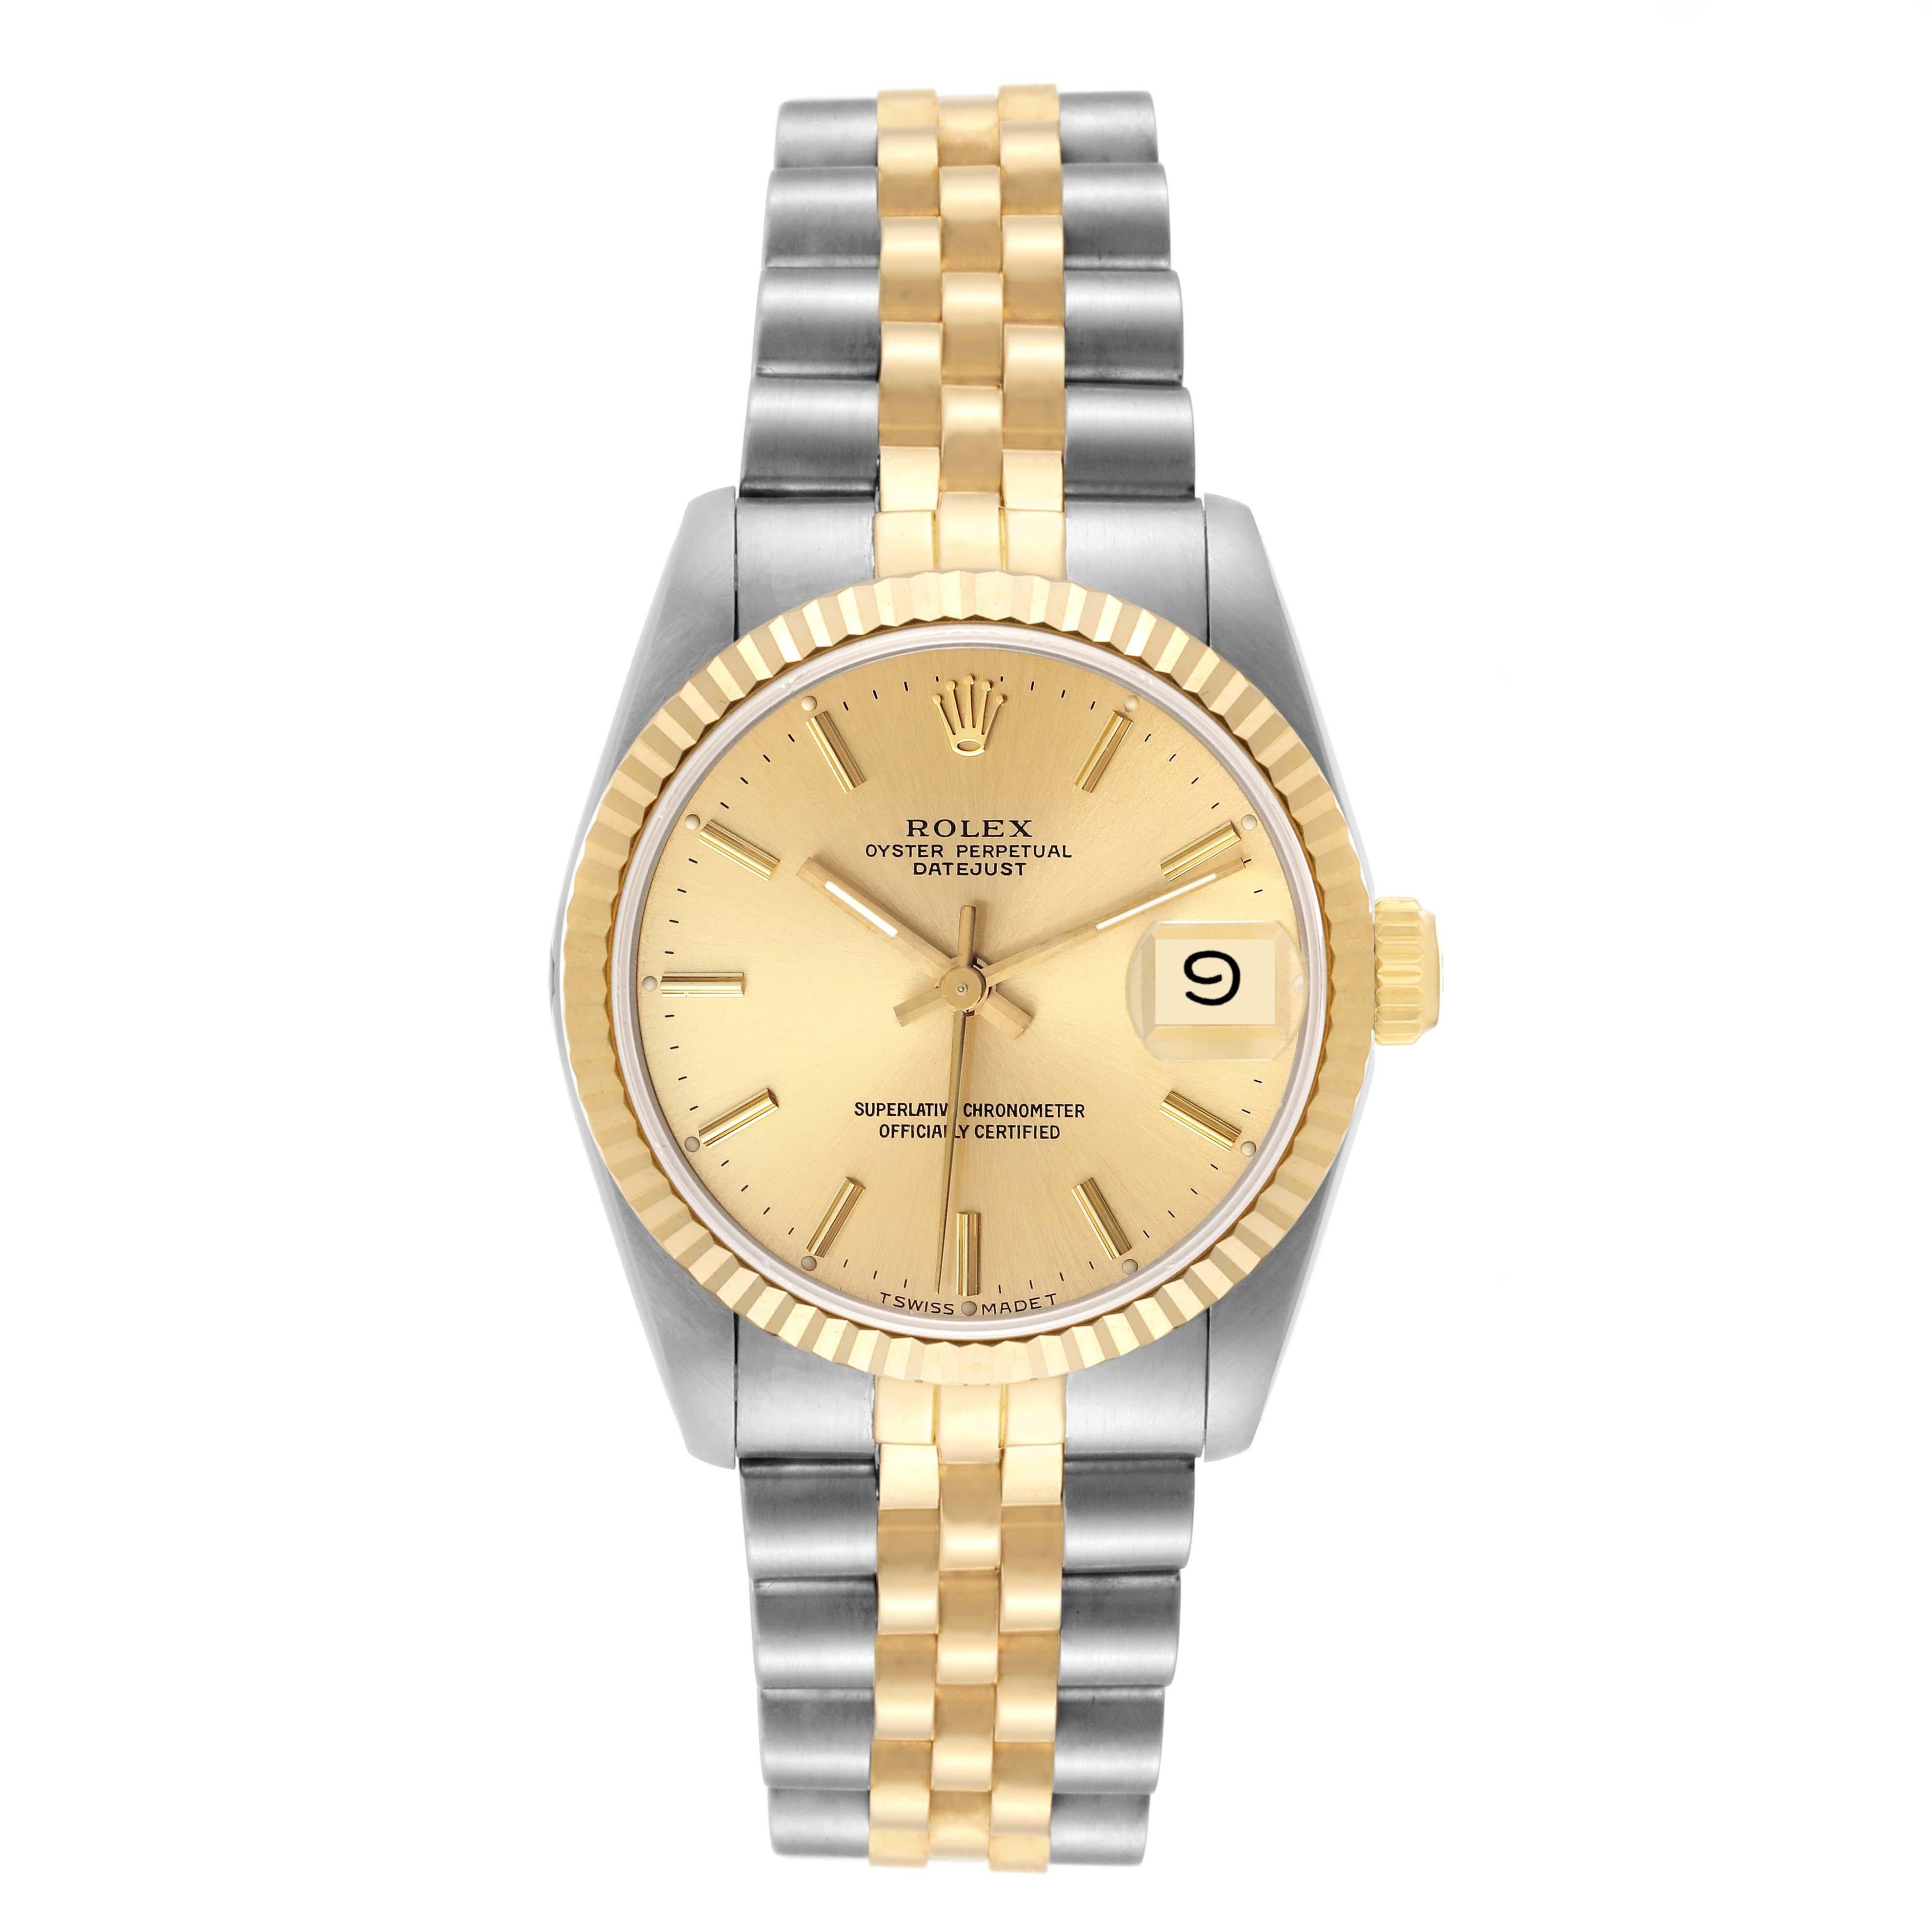 Rolex Datejust Midsize Champagne Dial Steel Yellow Gold Ladies Watch 68273. Officially certified chronometer automatic self-winding movement. Stainless steel oyster case 31 mm in diameter. Rolex logo on an 18K yellow gold crown. 18k yellow gold